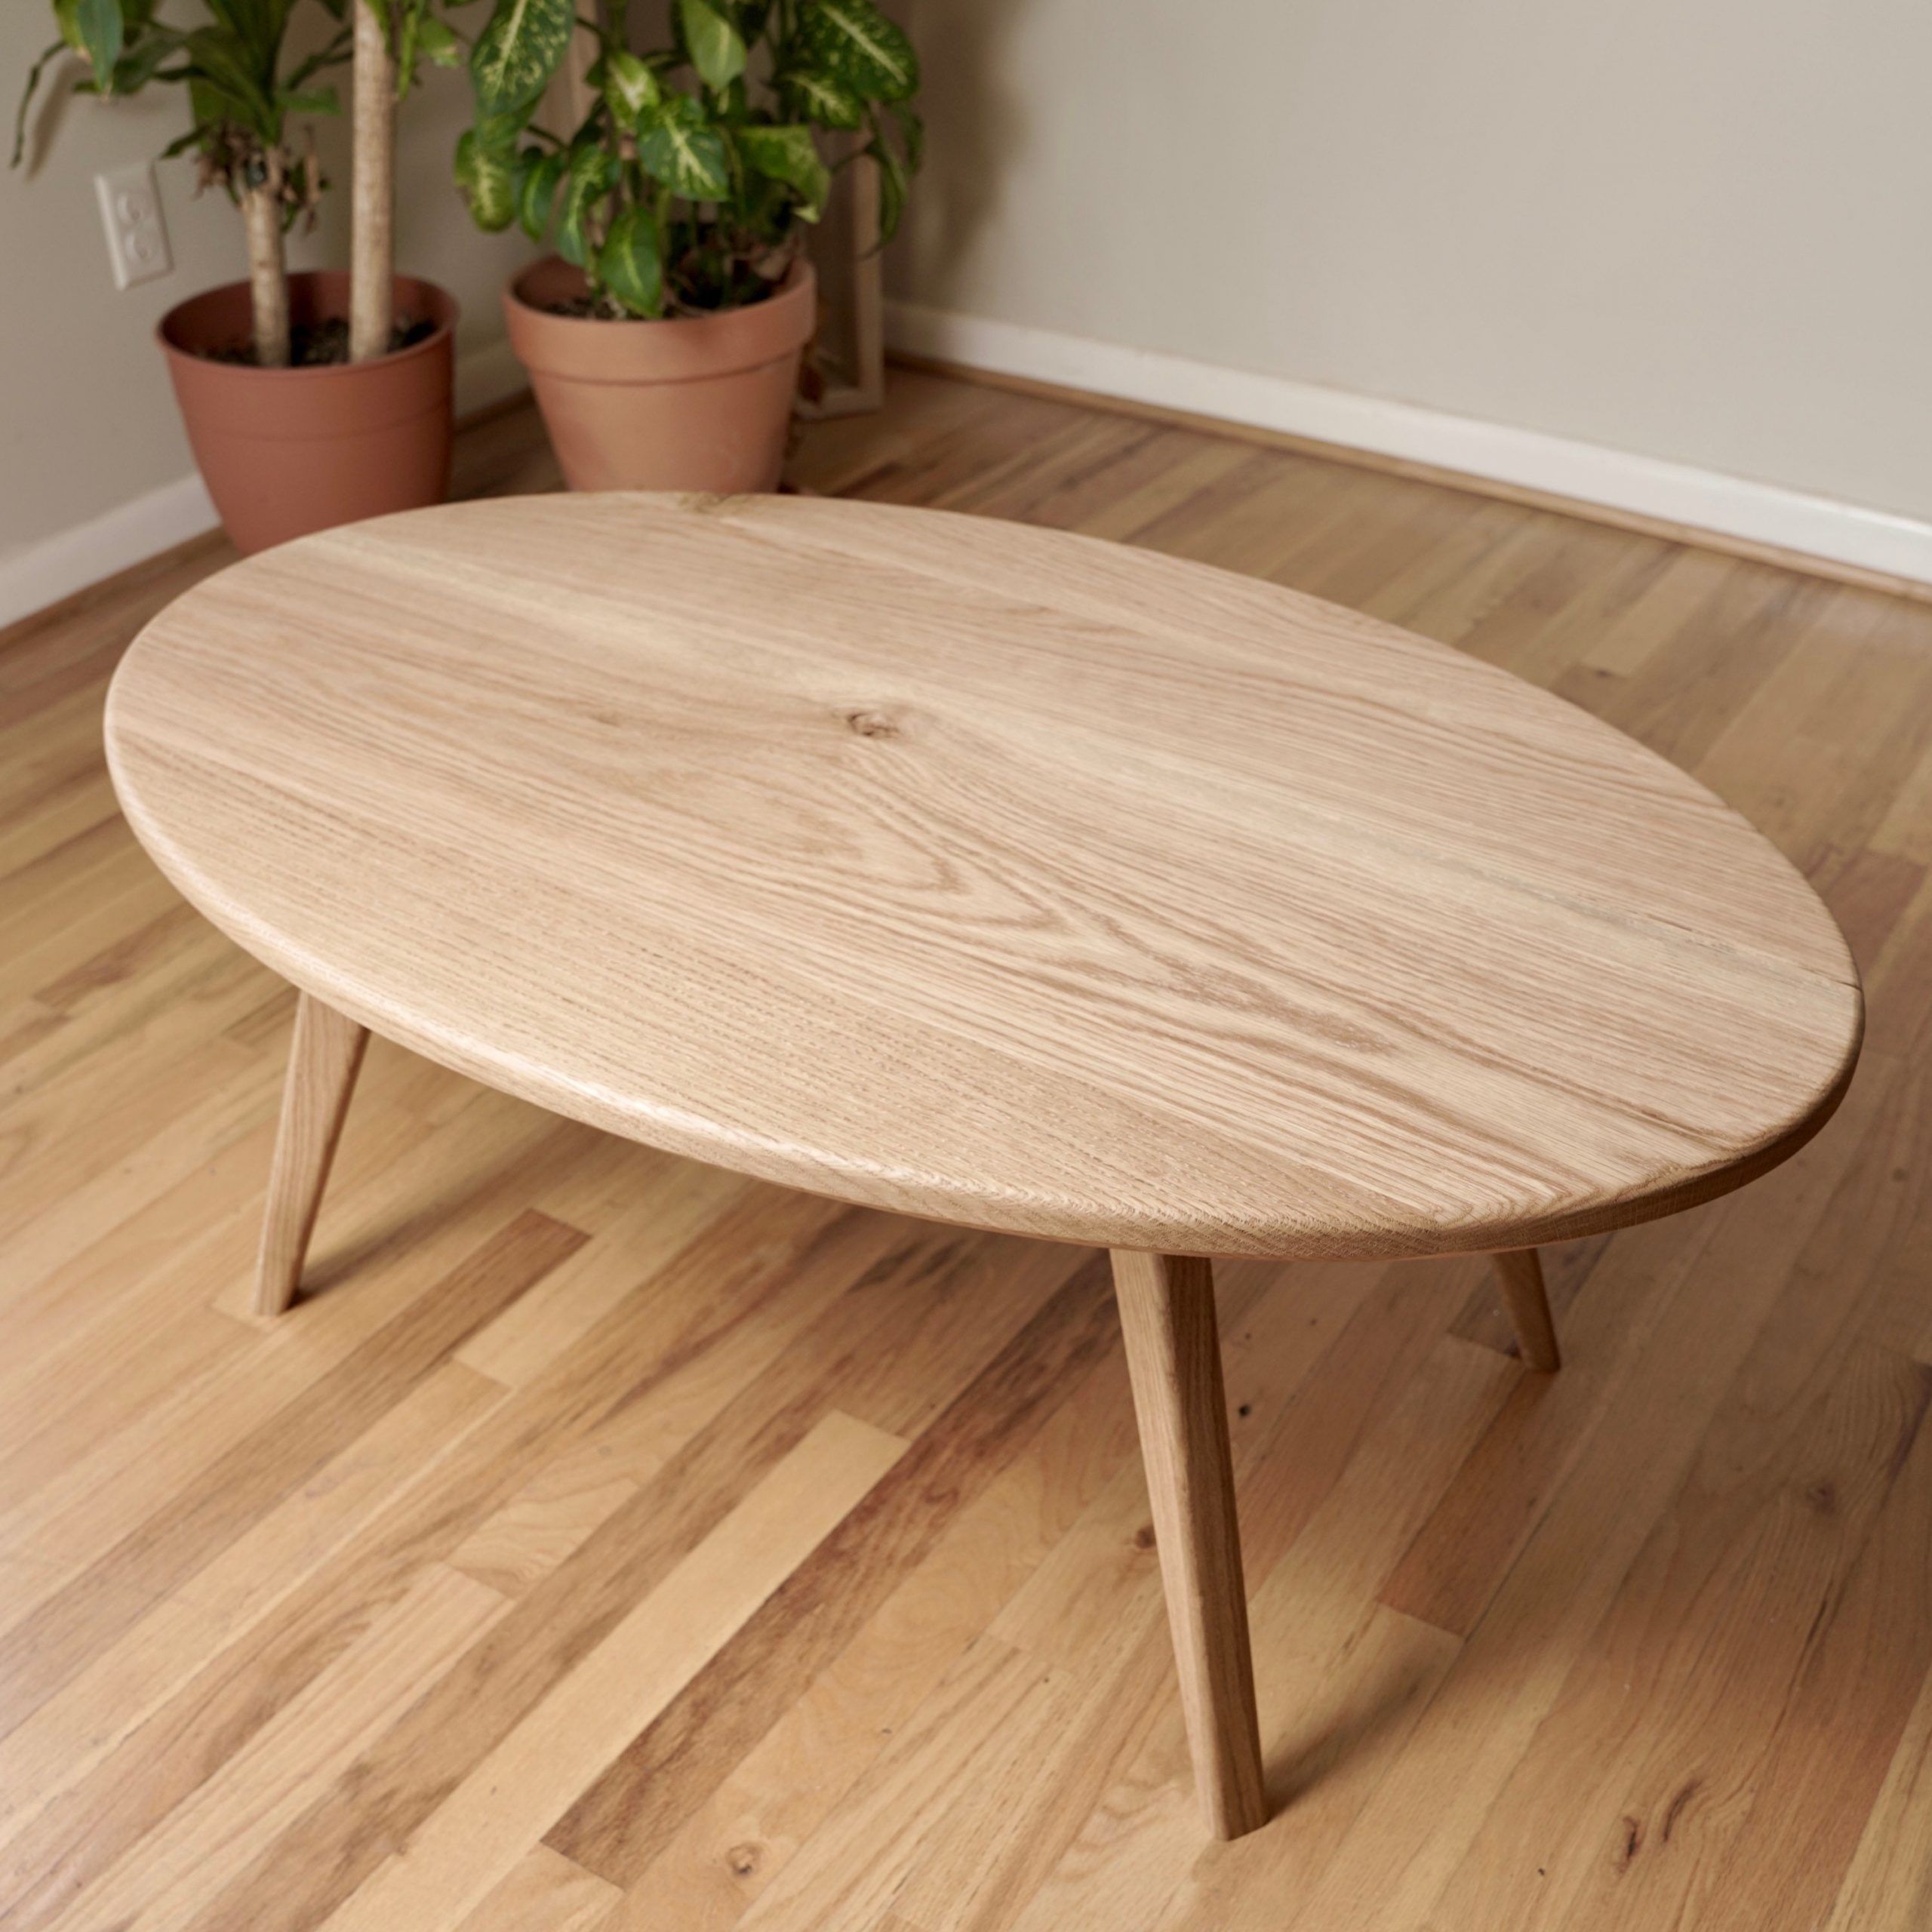 Oval Scandinavian Coffee Table – Etsy Within Scandinavian Coffee Tables (View 11 of 20)